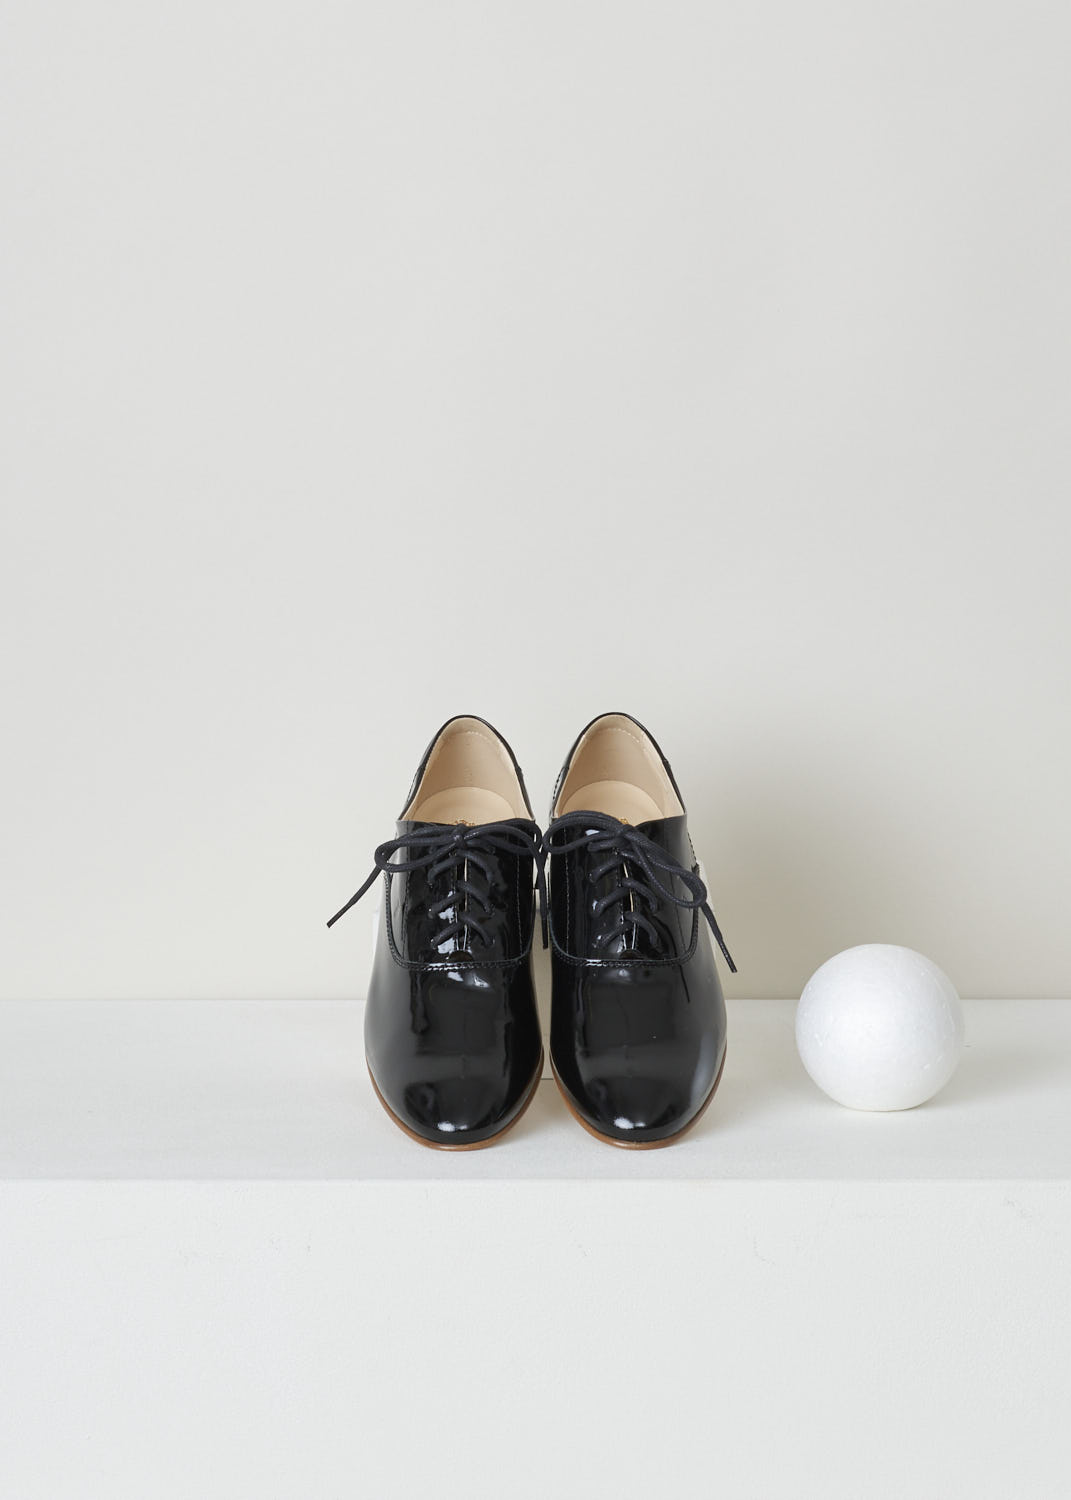 TODS, BLACK PATENT LEATHER OXFORD SHOES, XXW0QT00NN50OW0B999, Black, Top, Black patent leather Oxford shoes. This model has a rounded toe. The shoes have classic black laces. The sole is a beige color. 